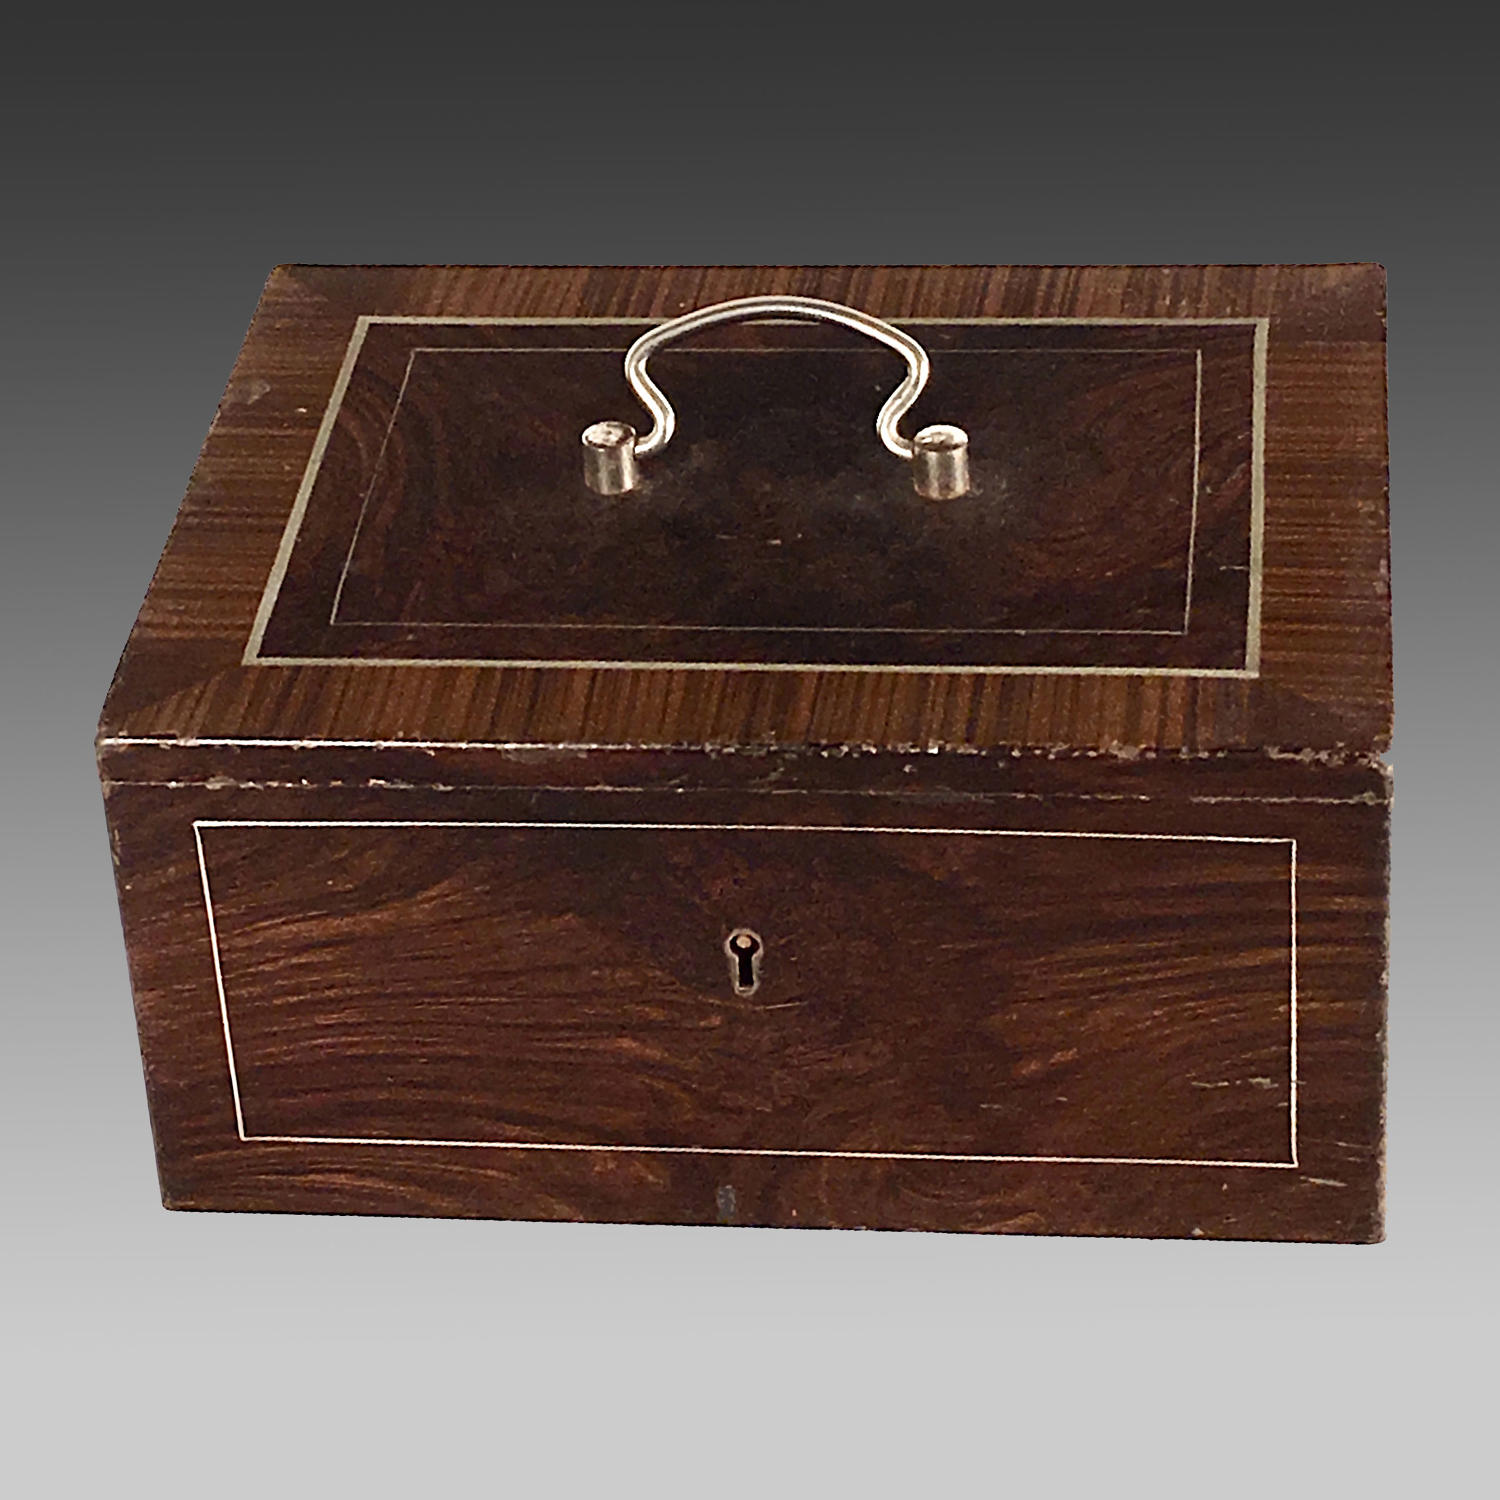 Late 19th century faux rosewood steel strong box